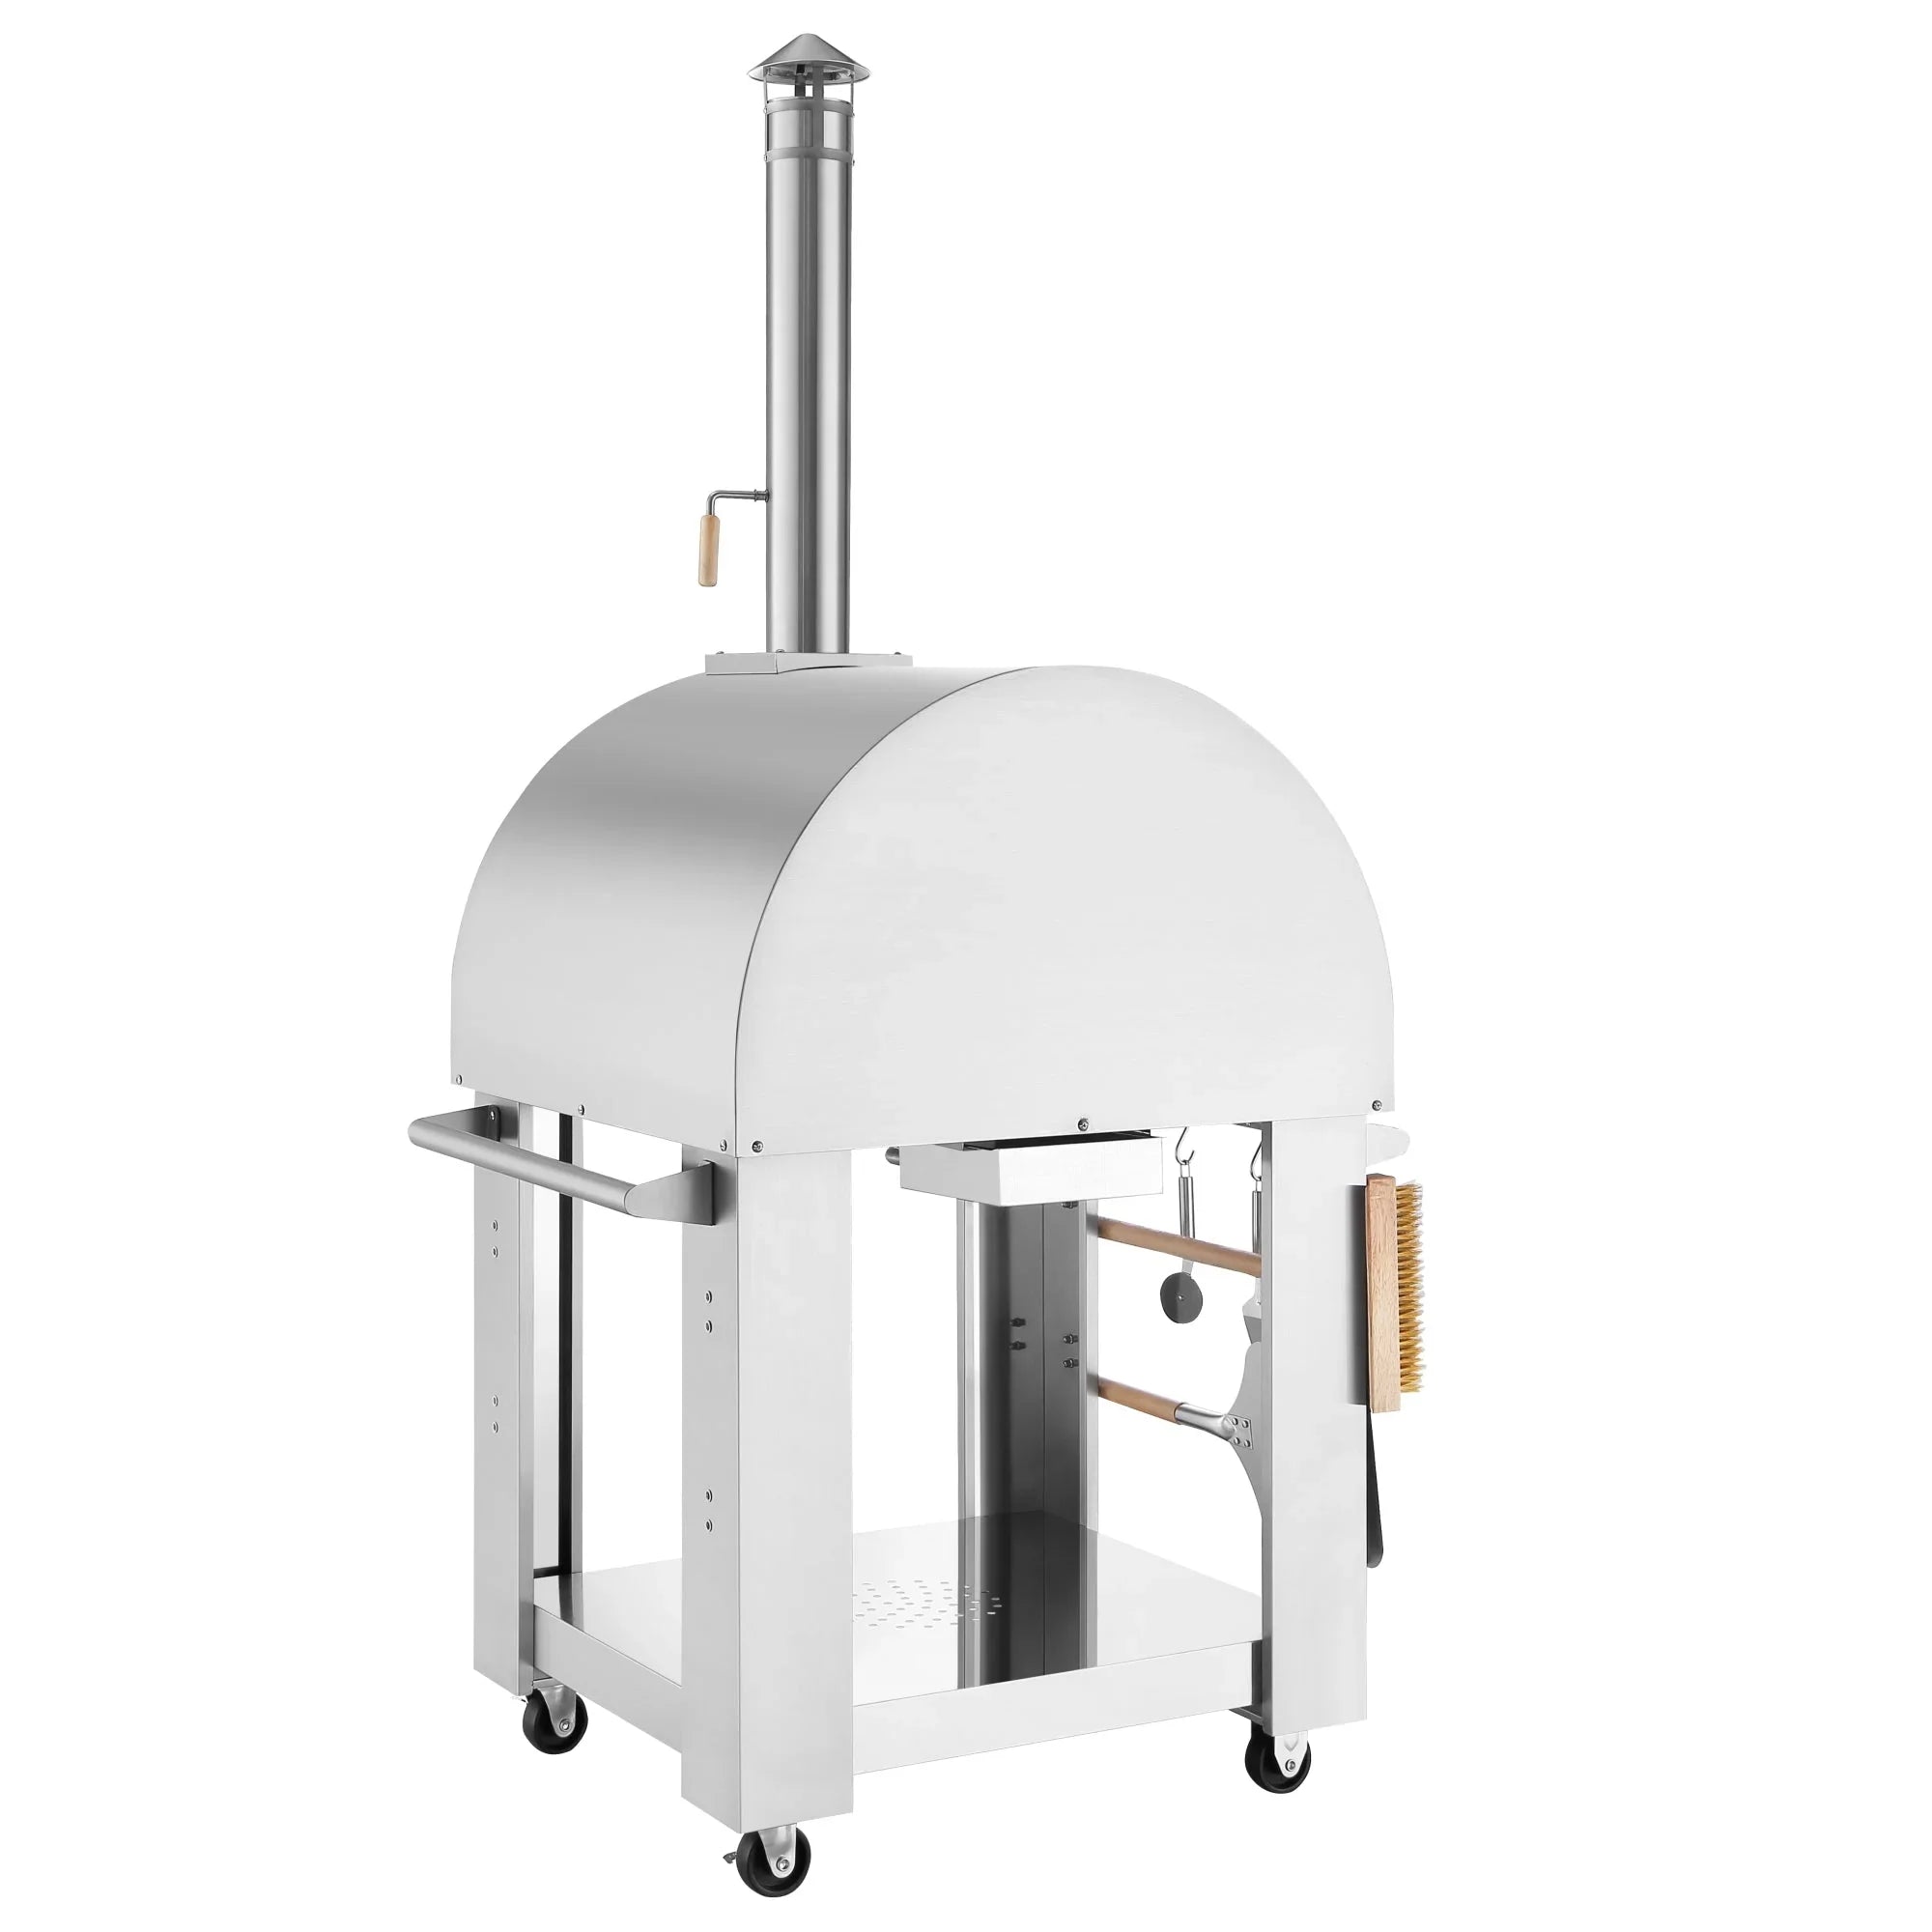 Empava Outdoor Wood Fired Pizza Oven in Stainless Steel (PG01)